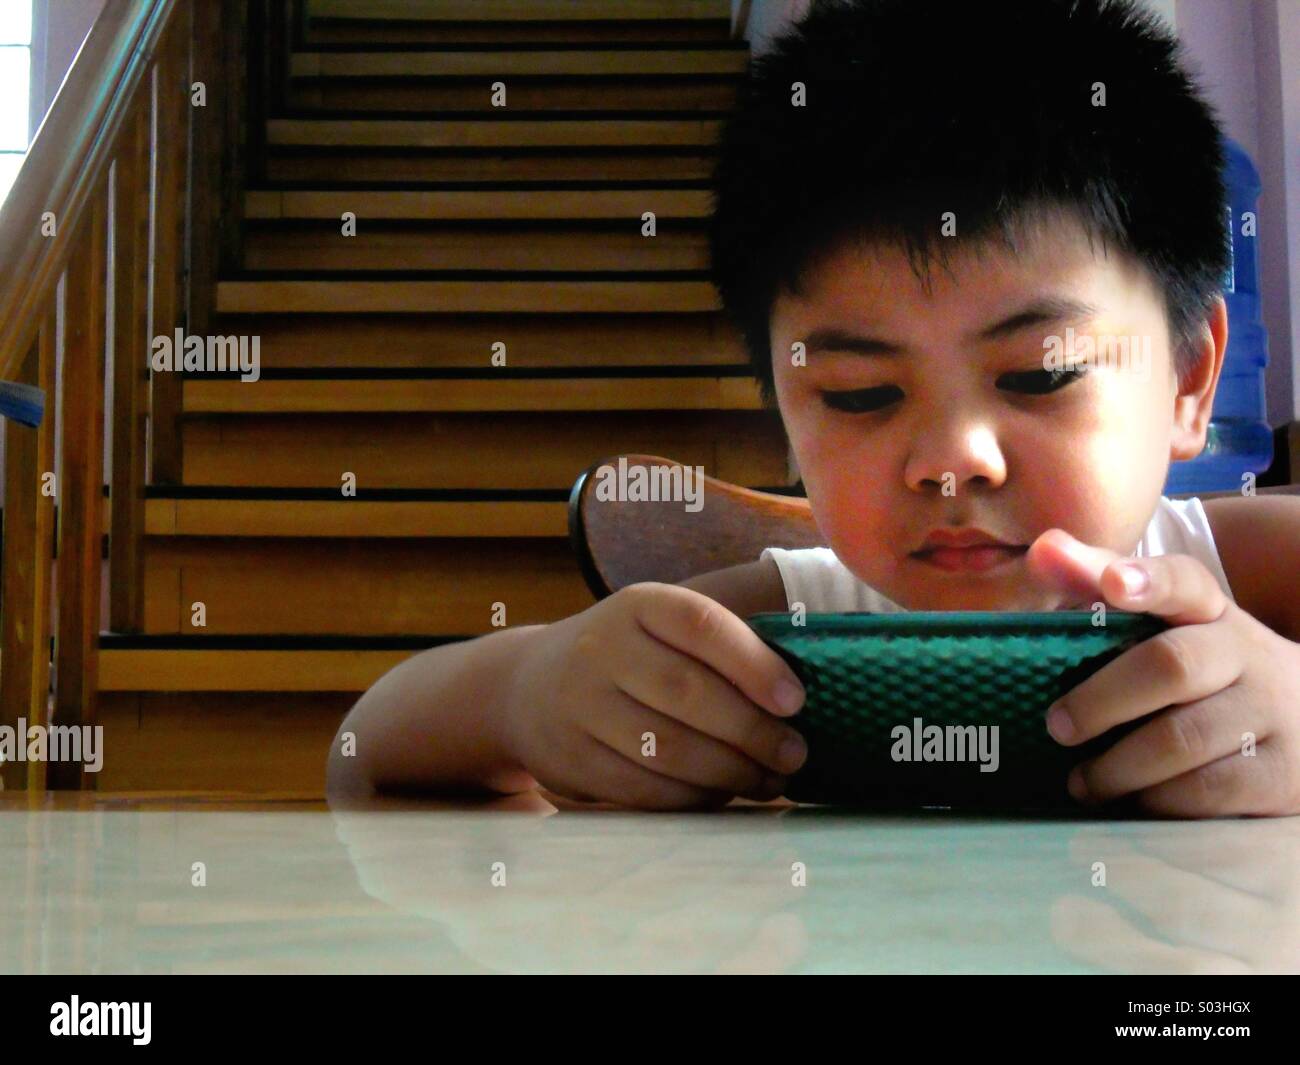 Asian child boy watching or playing on a tablet phone Stock Photo